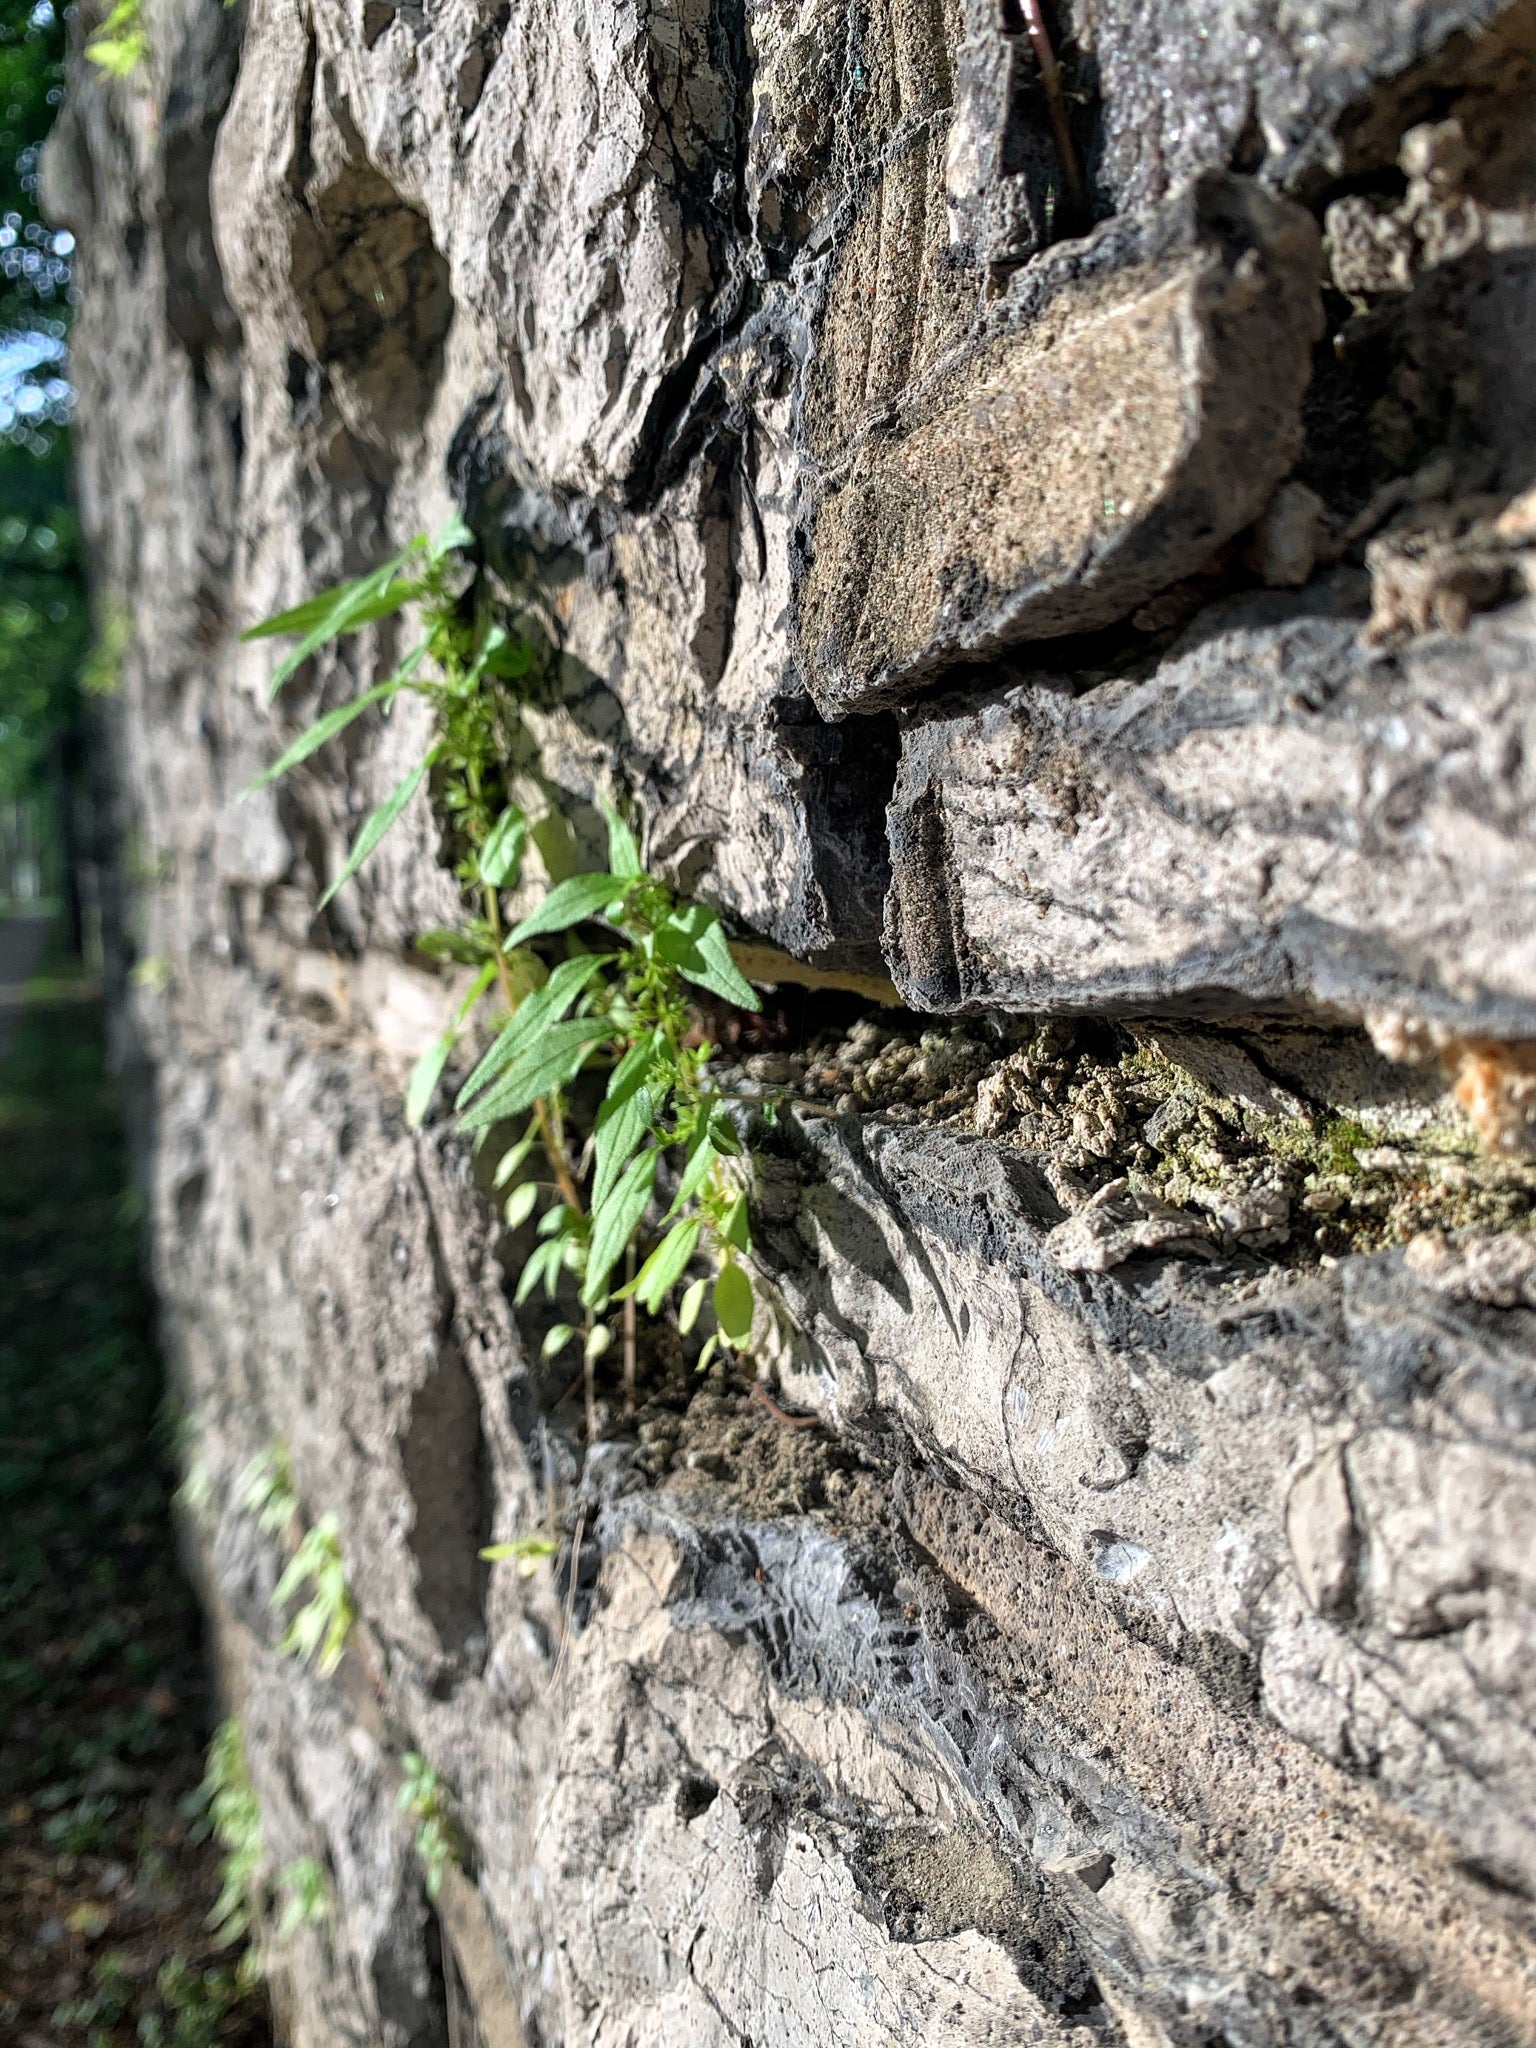 Plant life growing from the stone wall surrounding Sonnenberg Gardens, Canandaigua